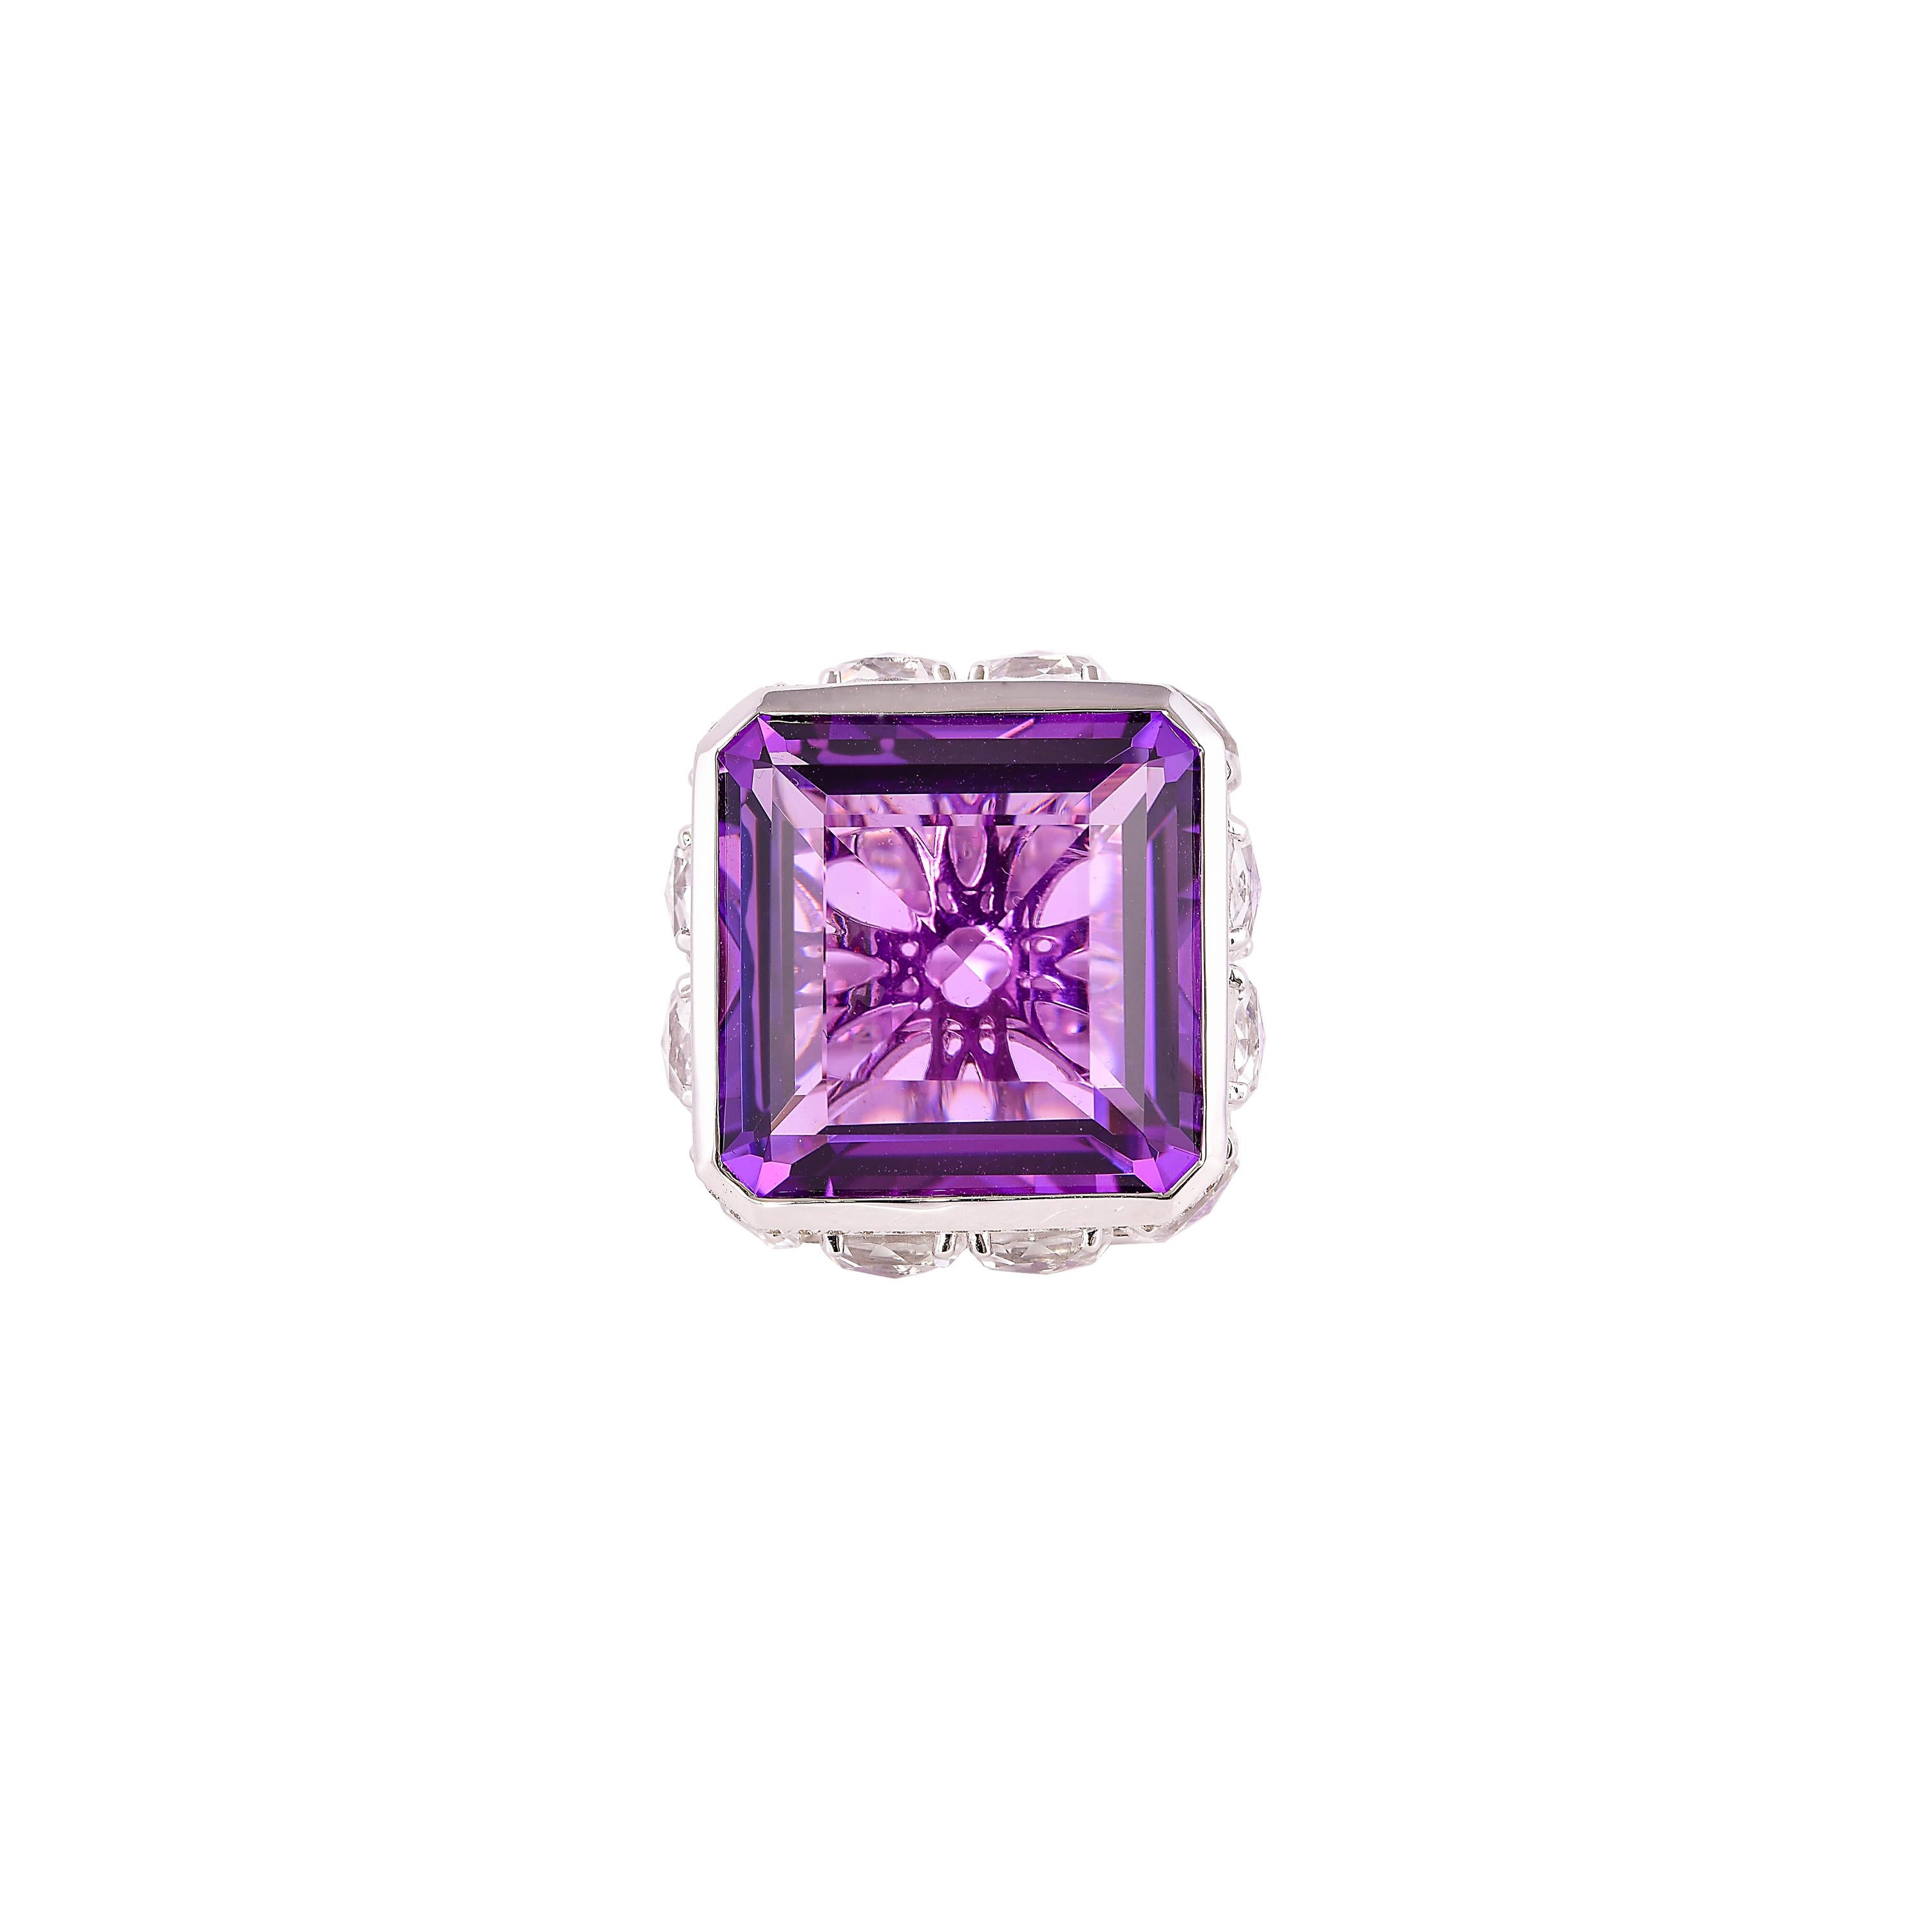 Sunita Nahata presents a stunning and regal 22 carat amethyst cocktail ring. The stunning center stone vibrantly sits on top of a cluster of diamonds and charming crystal quartz. The unique architecture to construct and combine these gemstones makes